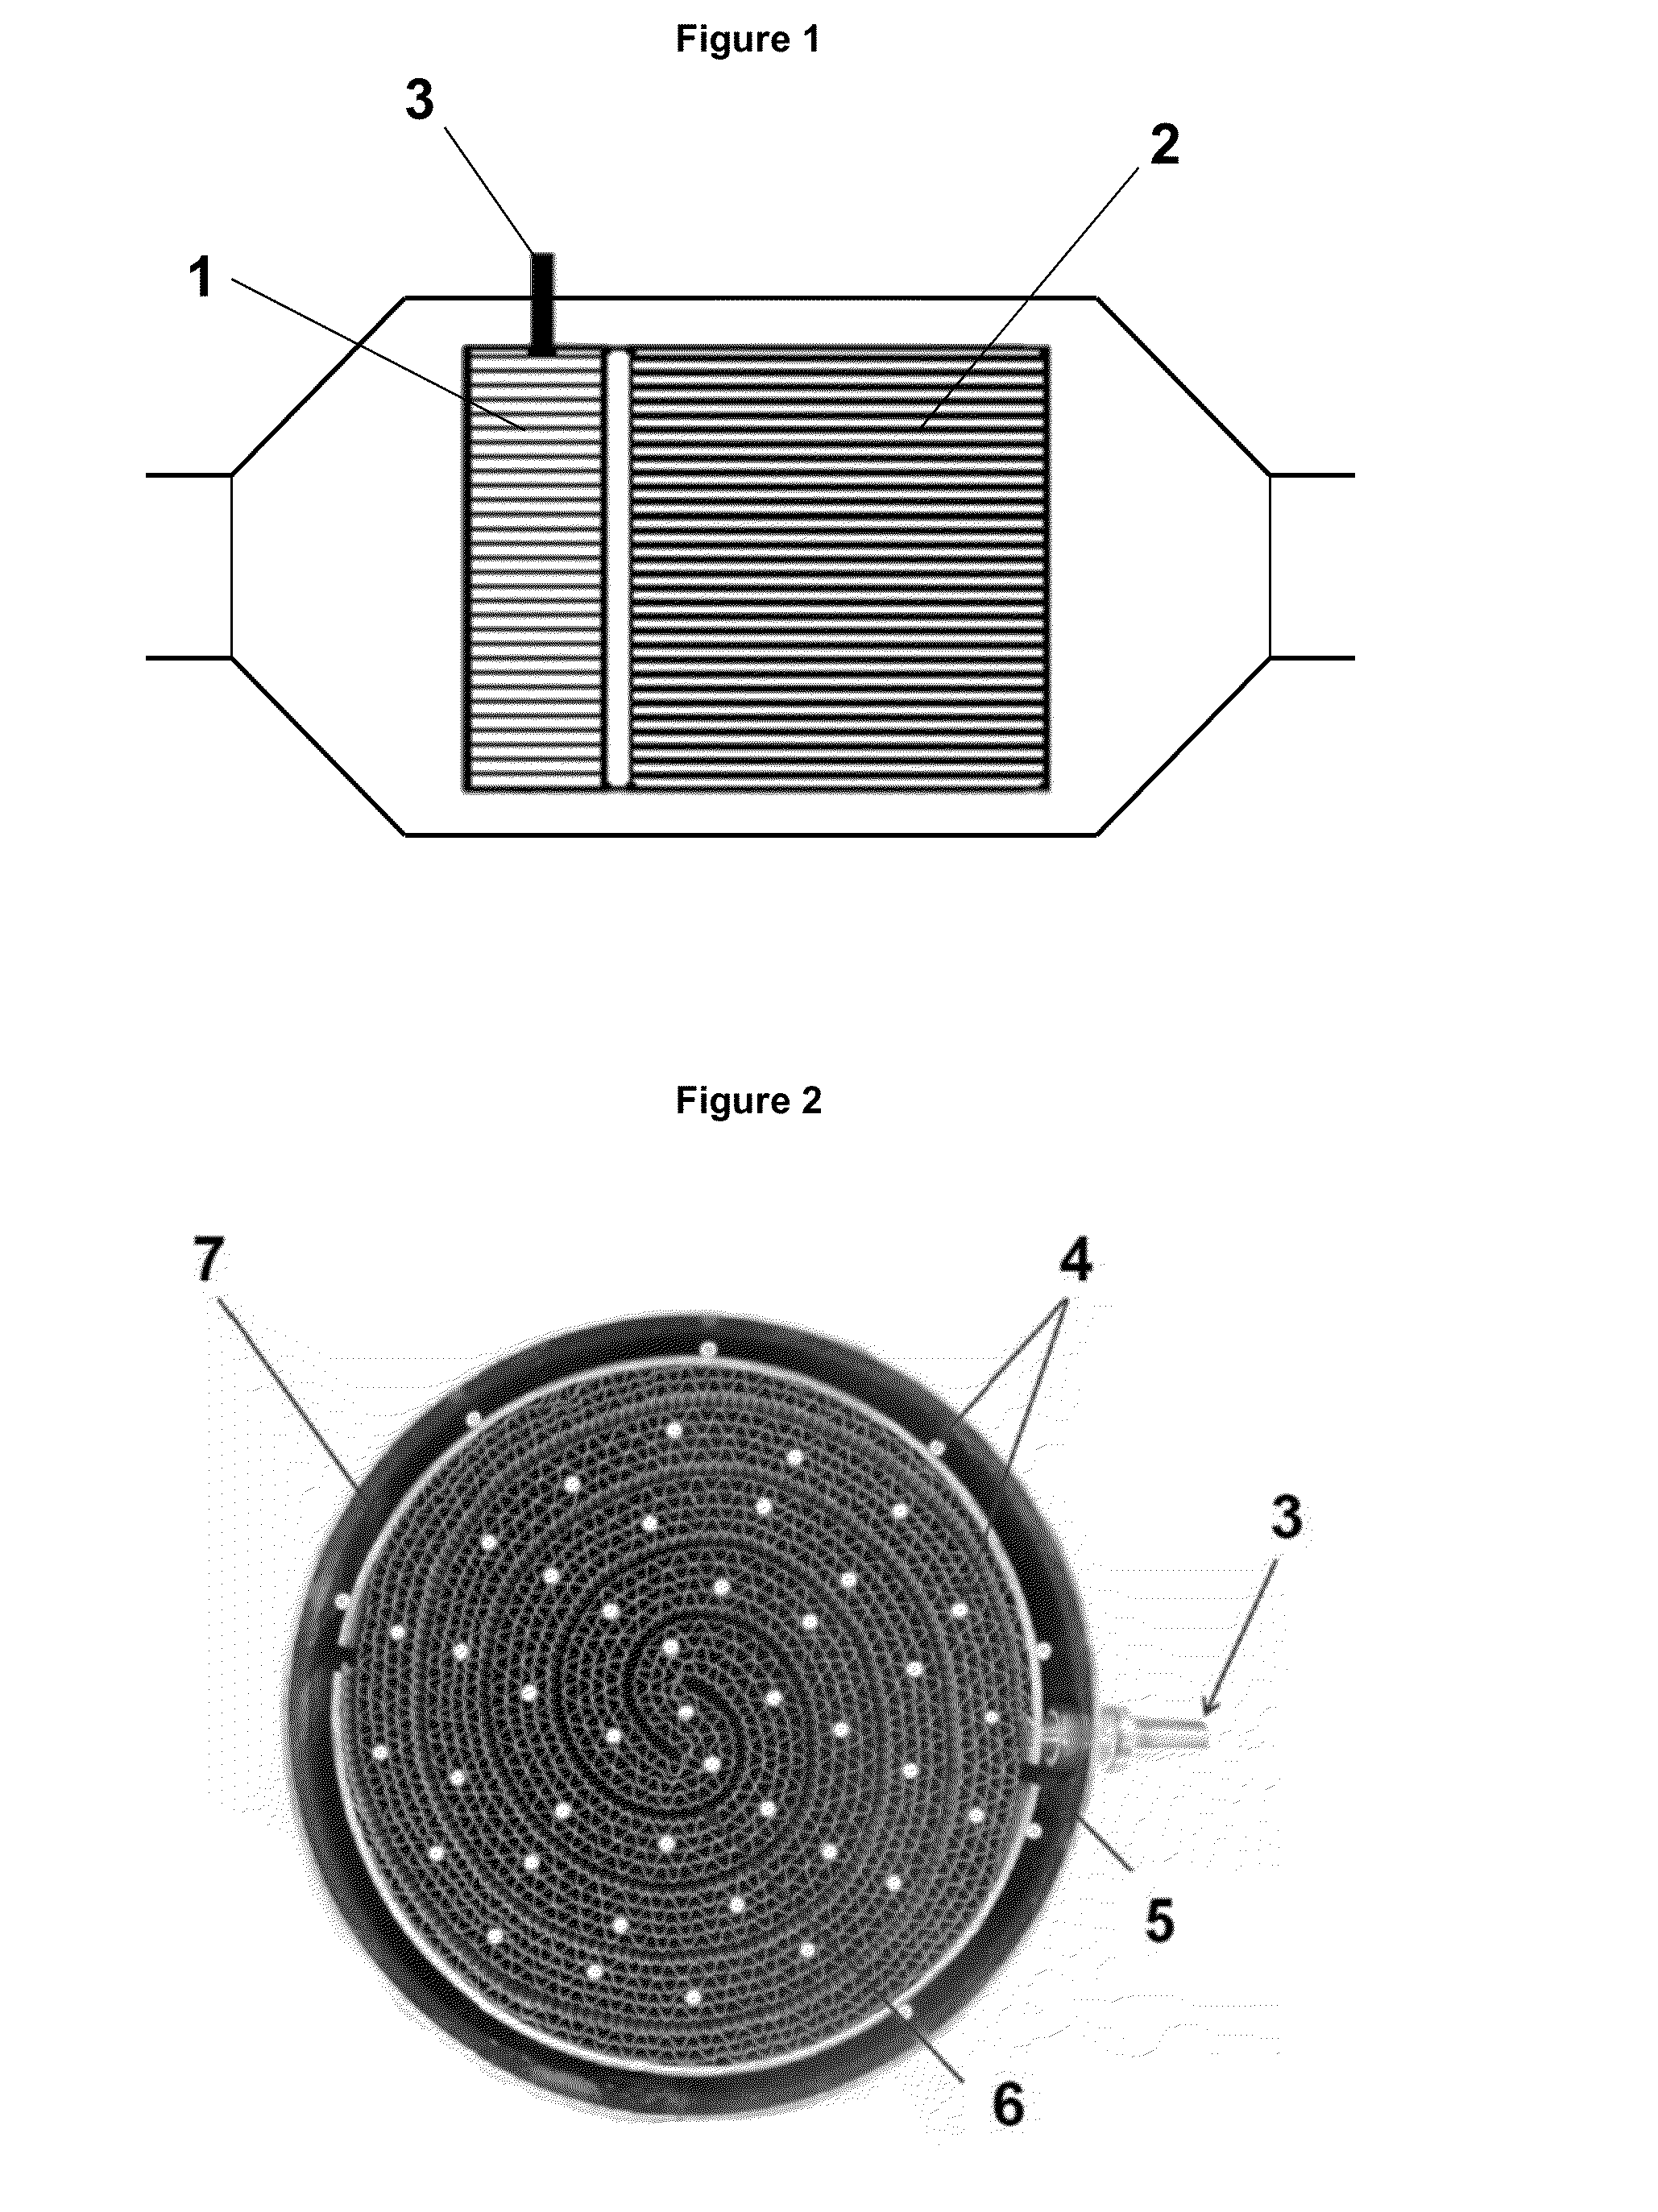 Electrically Heated Catalyst for a Compression Ignition Engine